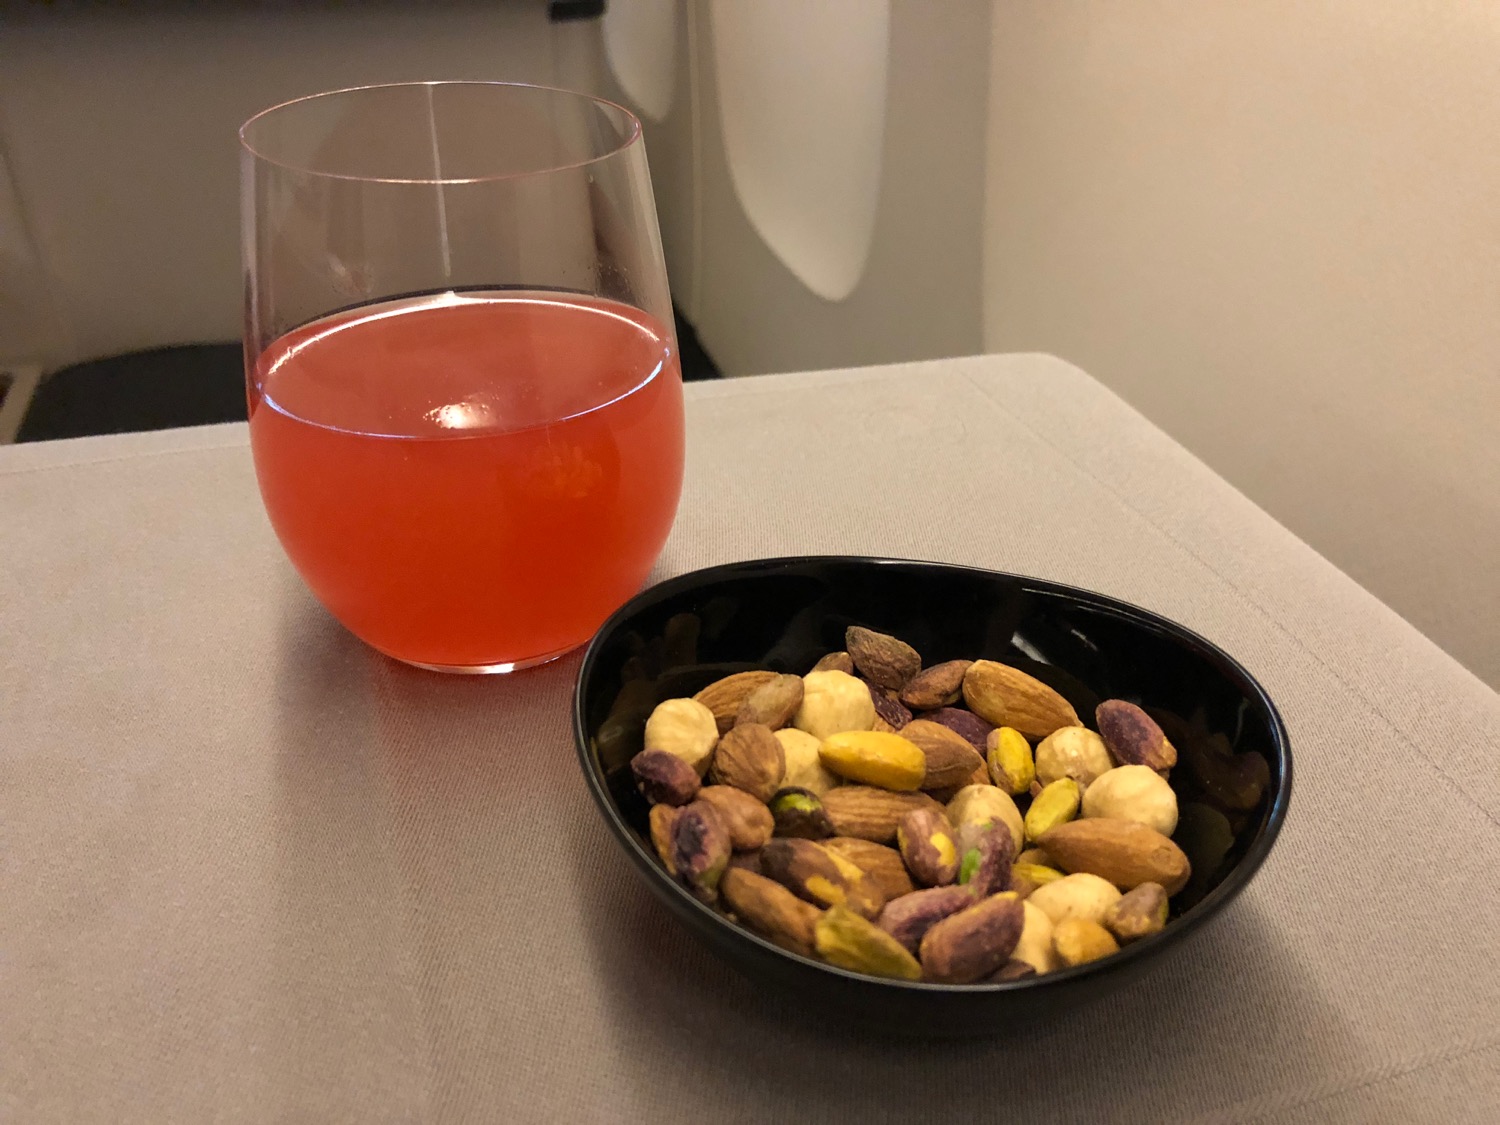 a bowl of nuts and a glass of juice